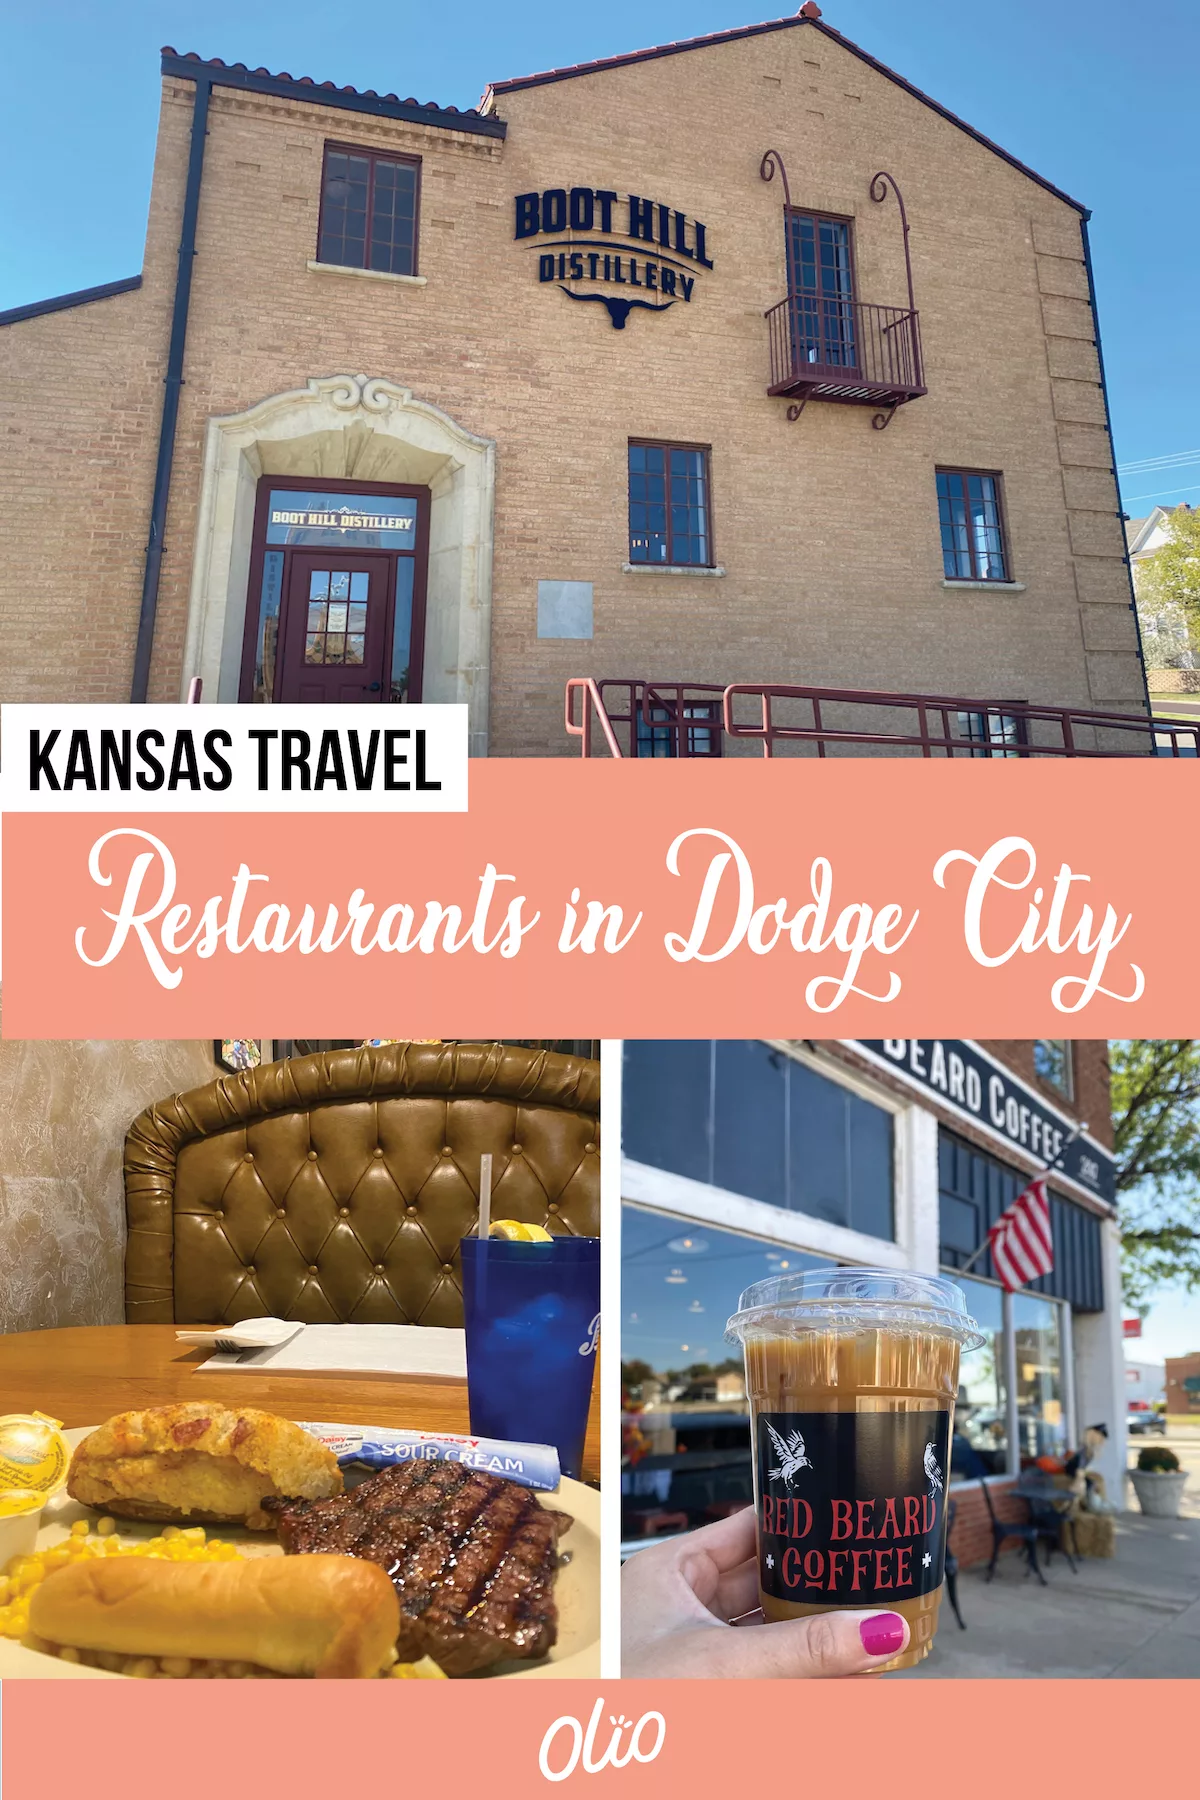 As the Queen of Cowtowns, founded because of the city's demand for booze, it's no surprise that you'll find some delicious restaurants in Dodge City, Kansas — plus some seriously talented brewers and distillers. From classic steakhouses to locally-owned coffee shops, discover six places to grab a bite to eat in this southwestern Kansas town that gives visitors a slice of the Wild West.